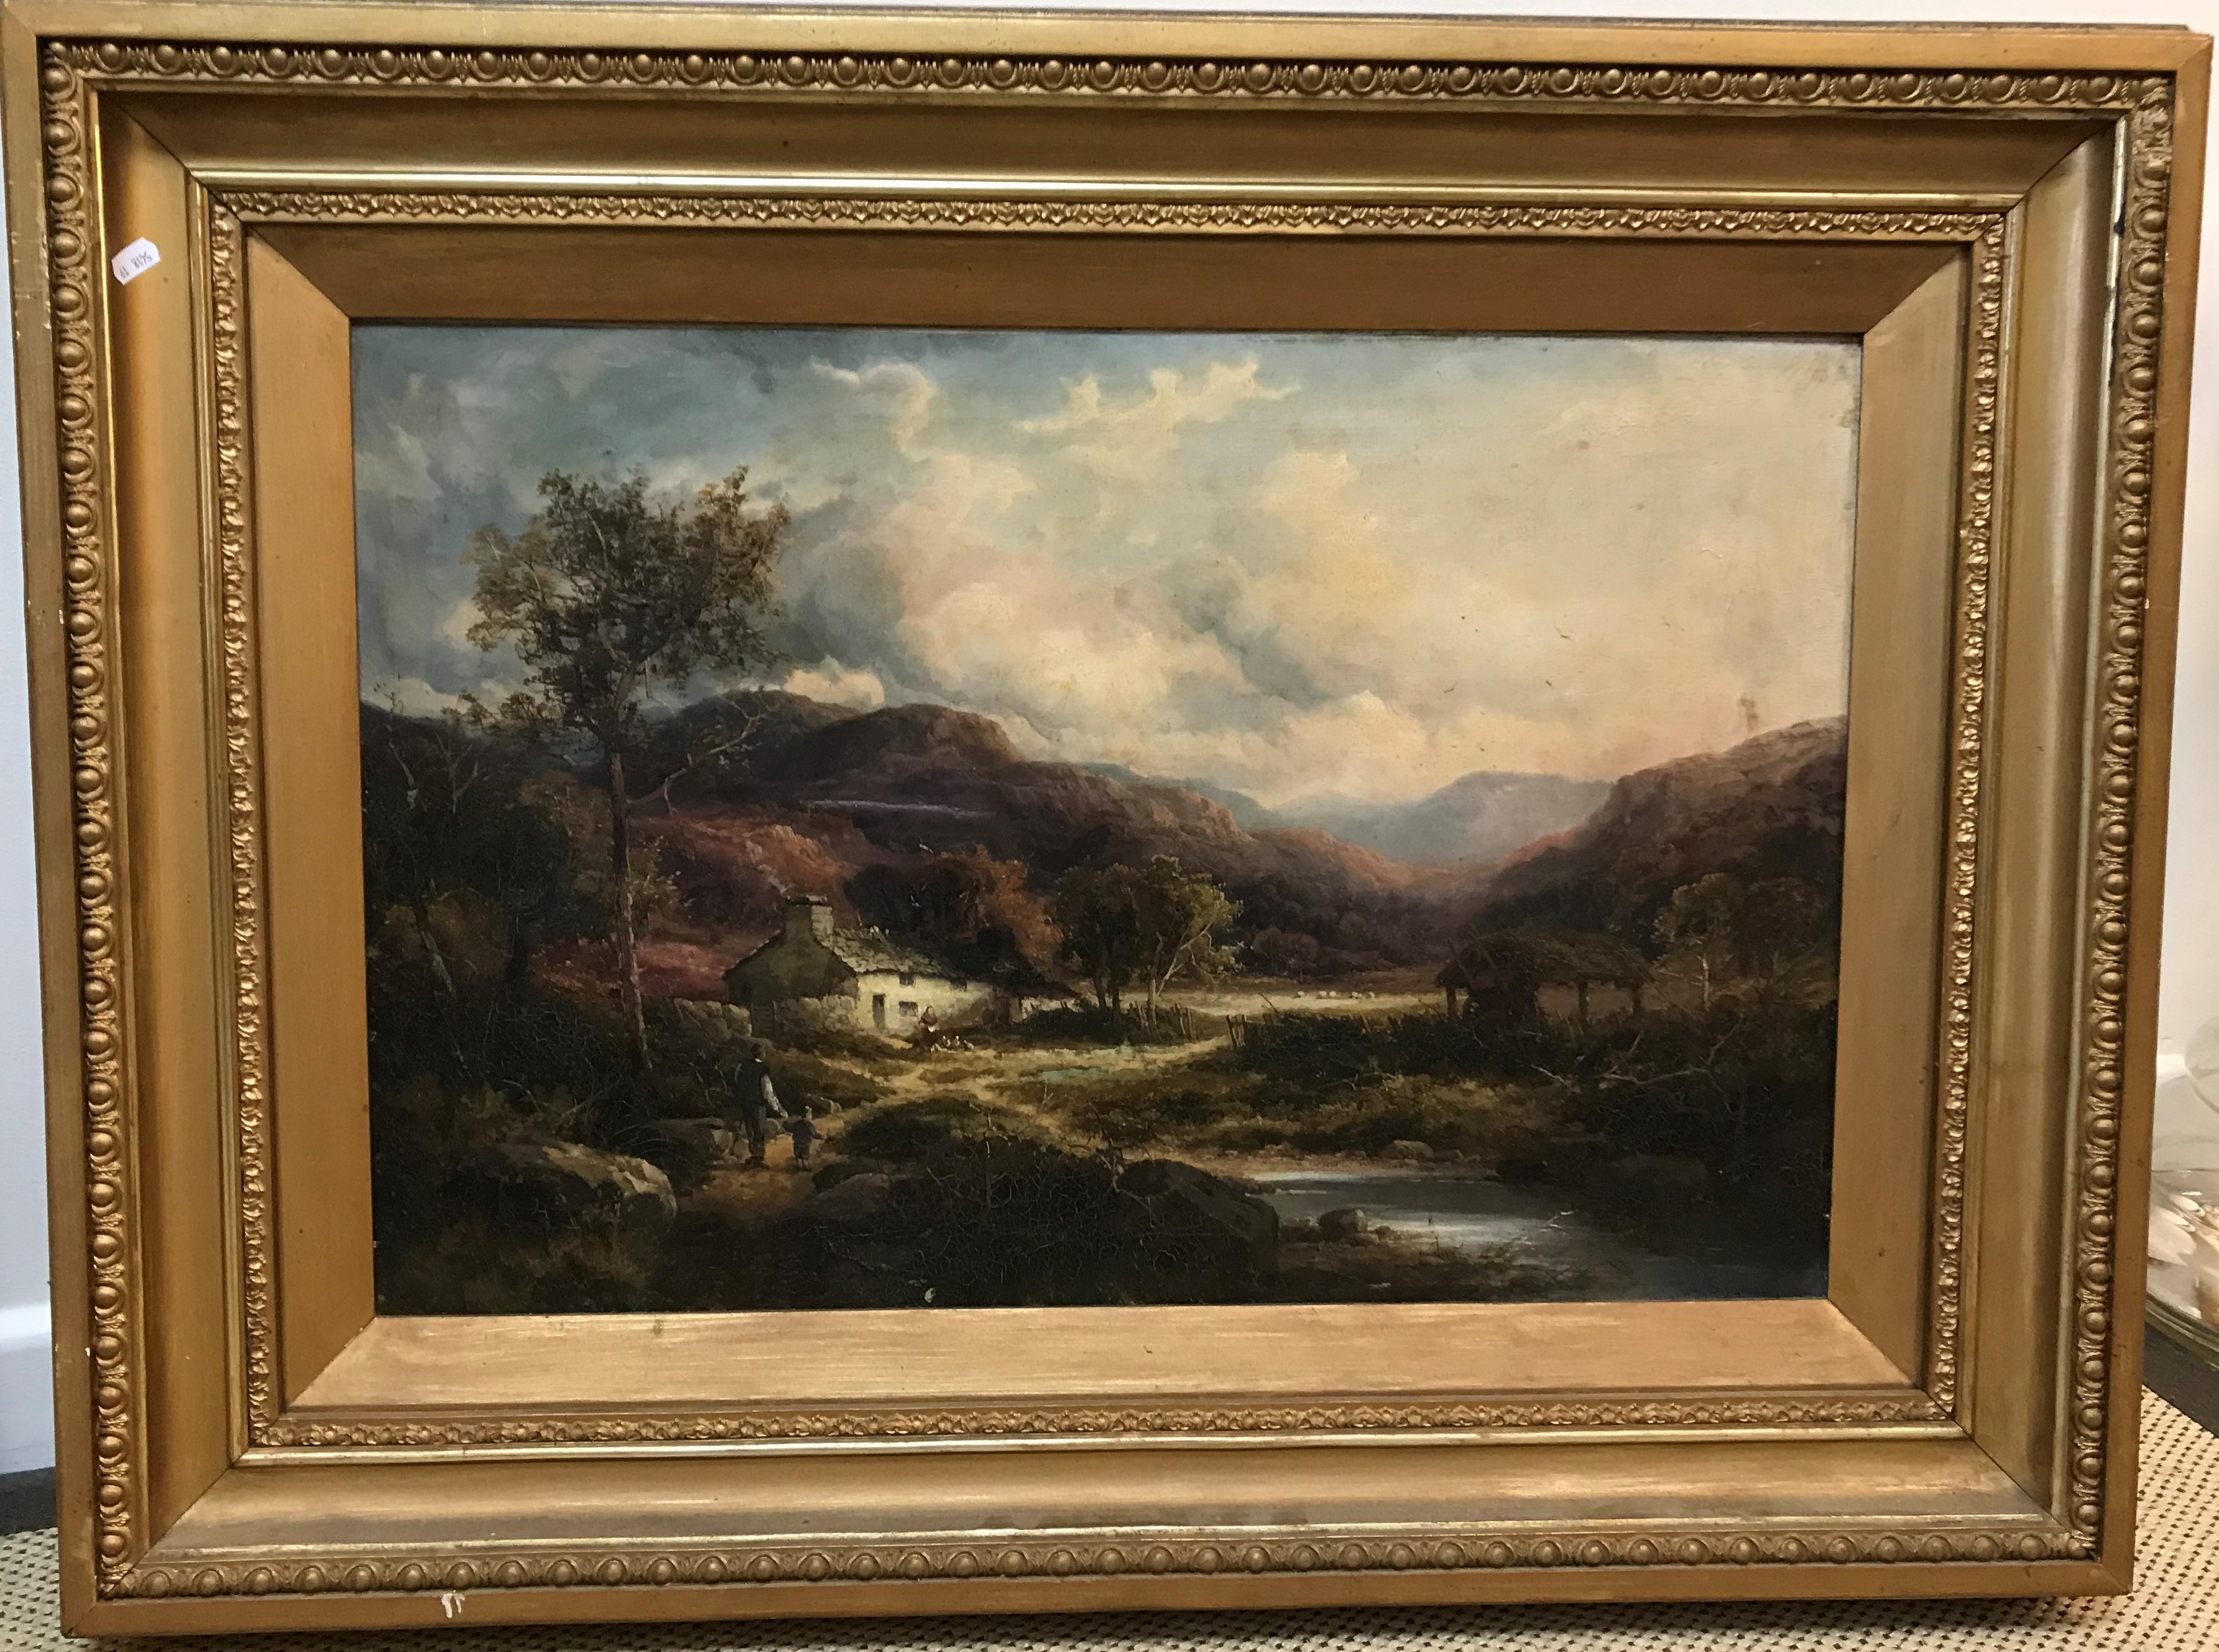 THOMAS SEYMOUR "Mountainous landscape with figures by stone cottage in foreground", oil on canvas, - Image 3 of 4